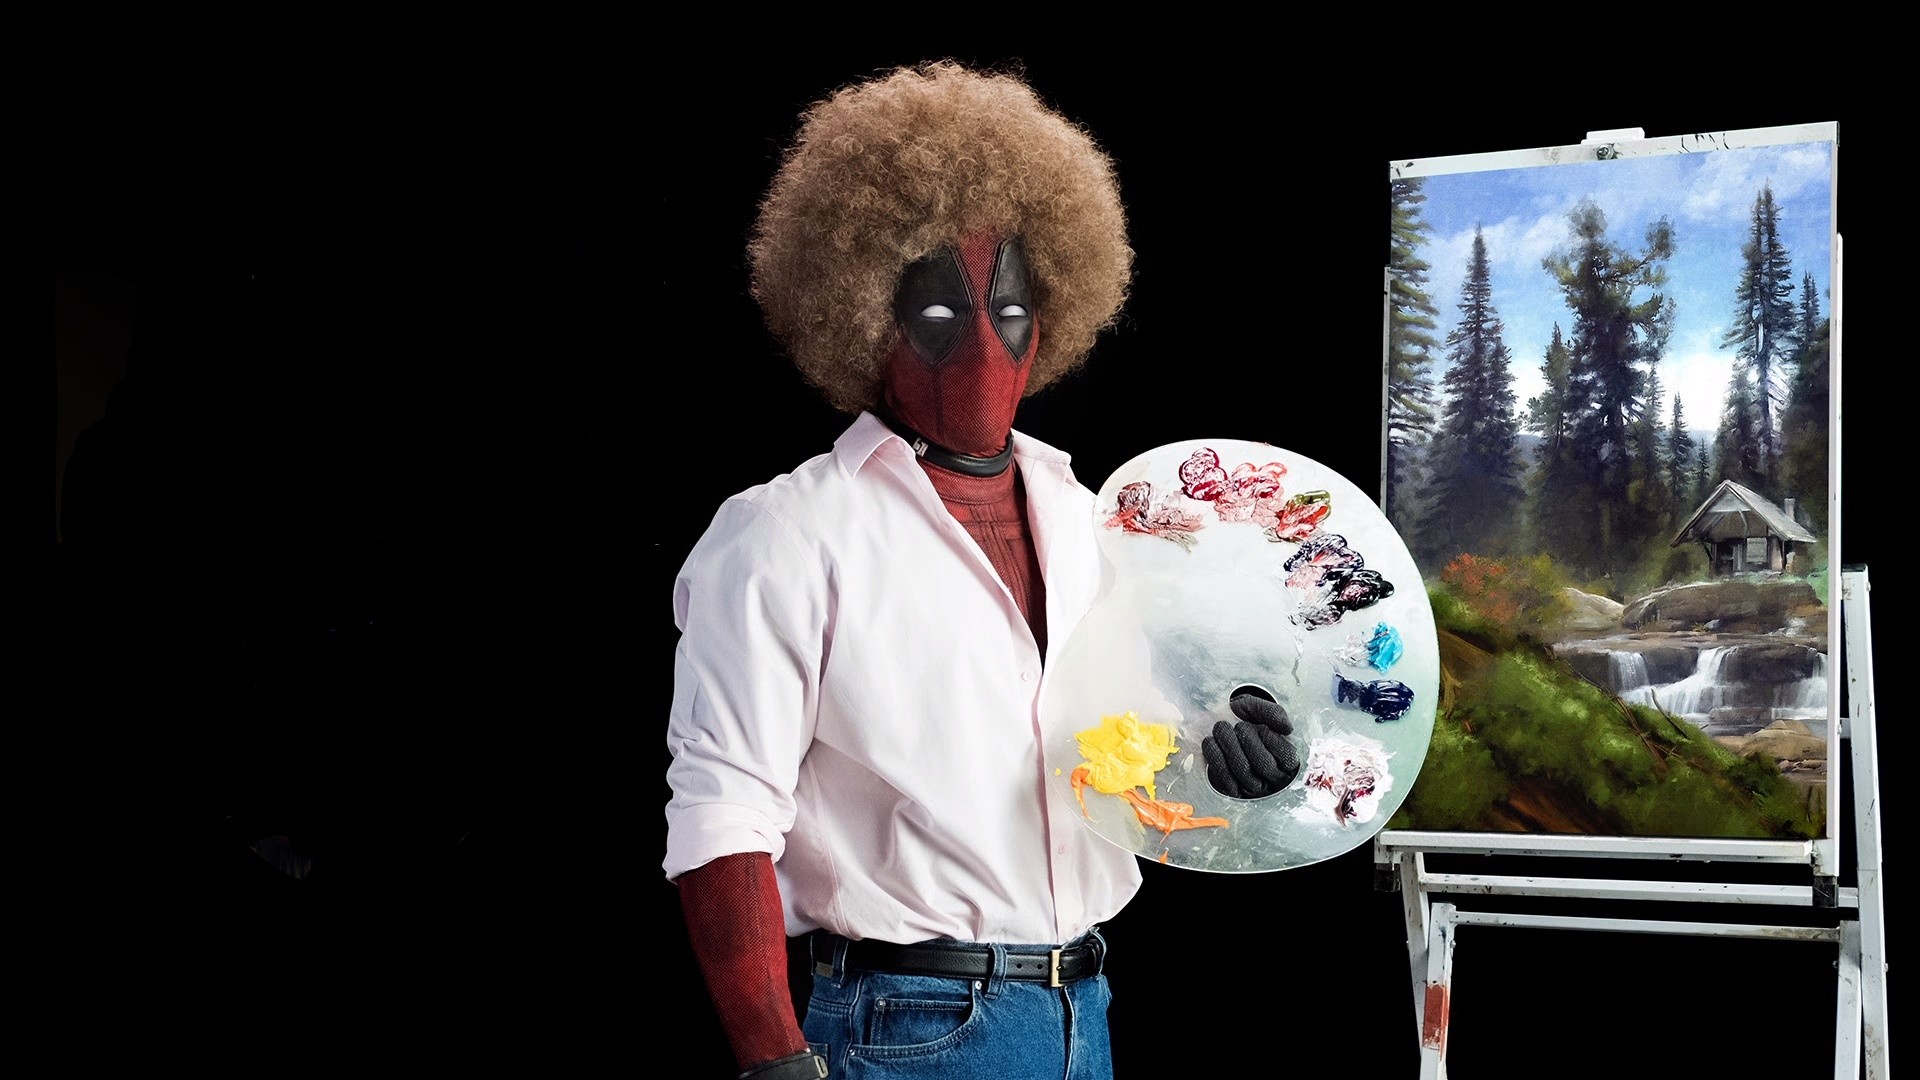 Deadpool Afro Painting Bob Ross Humor Movies 1920x1080